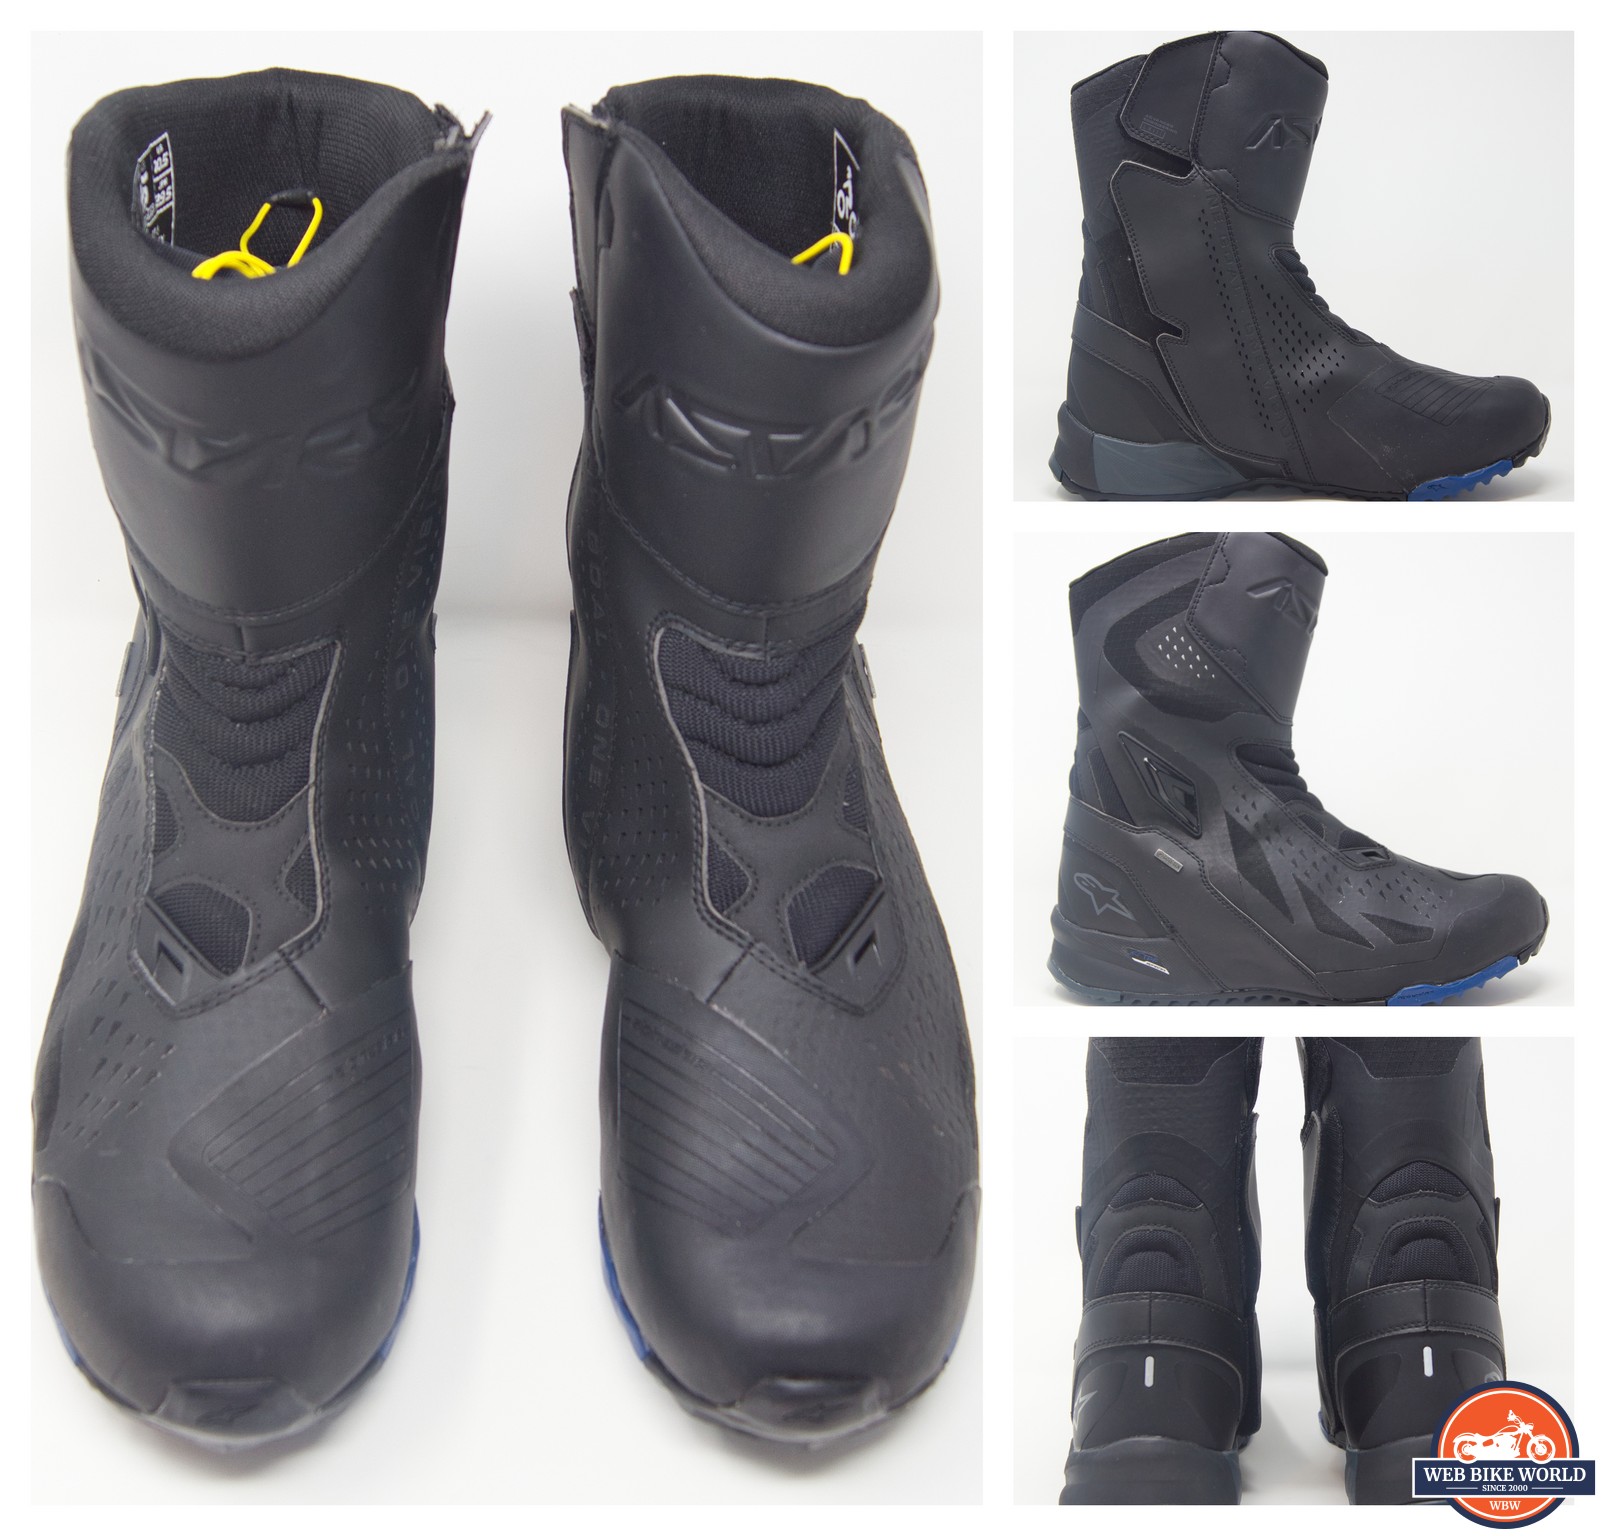 Various angles of the Alpinestars RT-8 Gore Text Boots